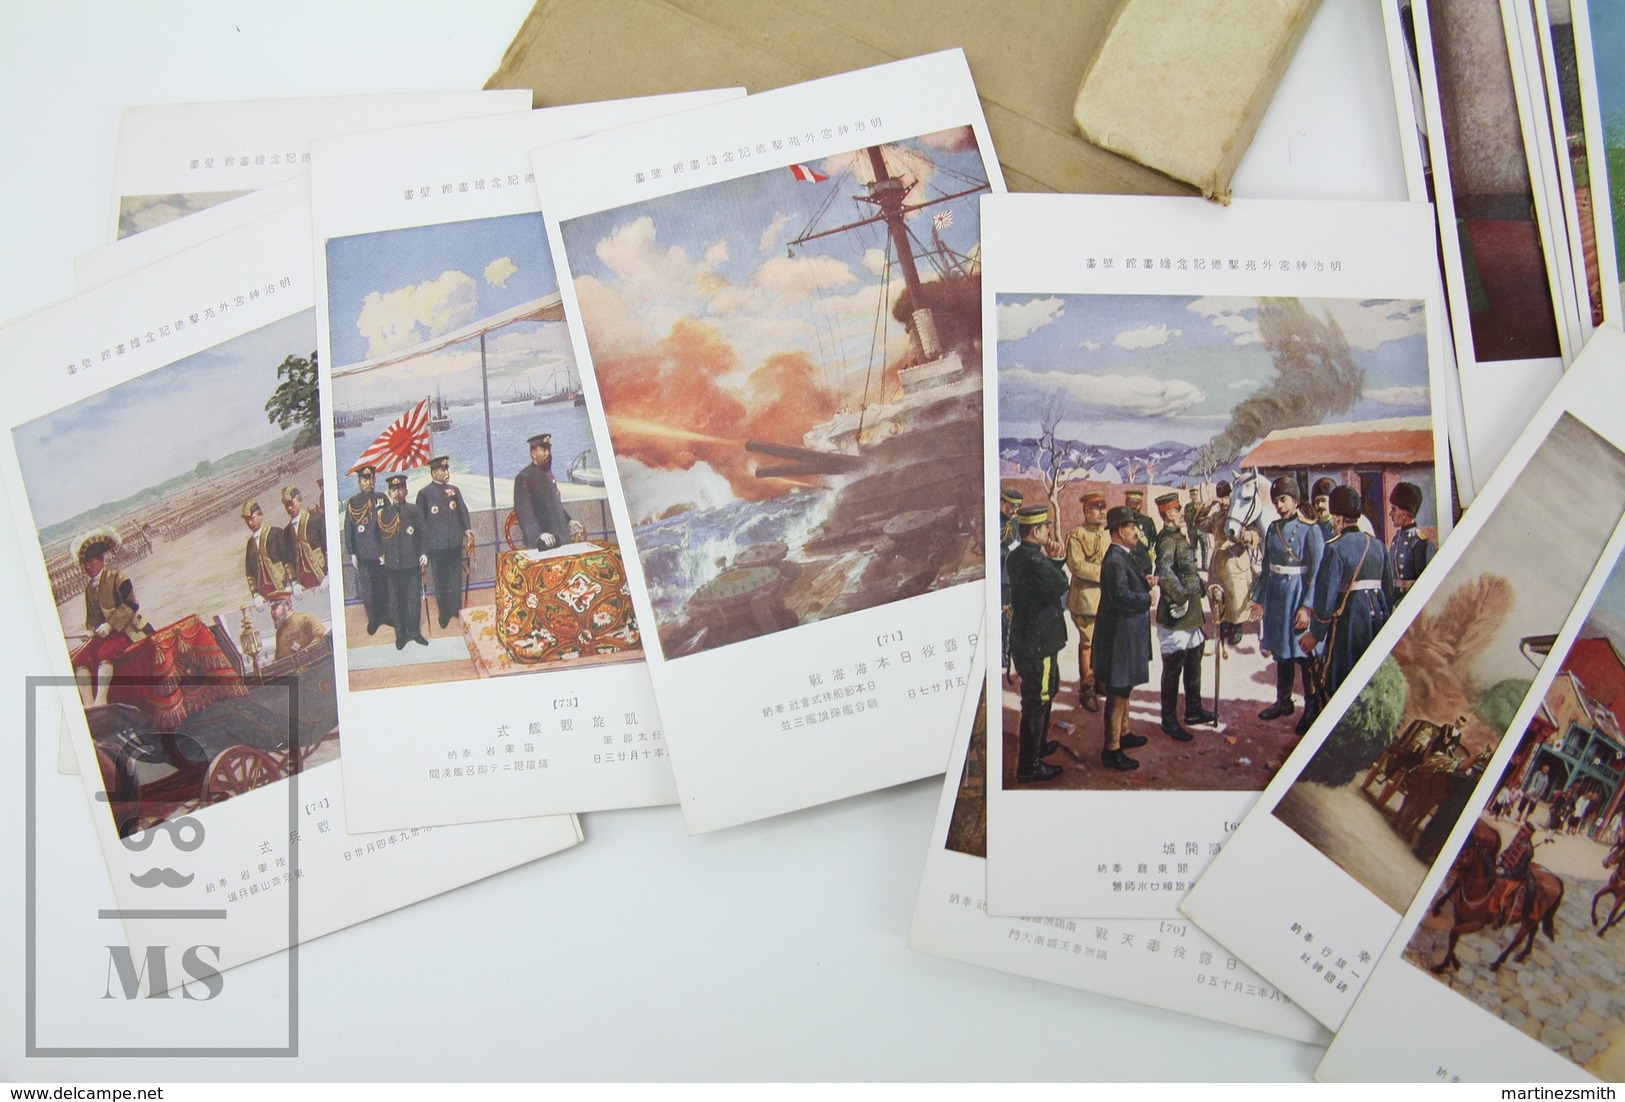 Vintage Japan Postcard Folder  - 40 Different Illustrated Views from Paintings - The History of Meiji Emperor - WWI